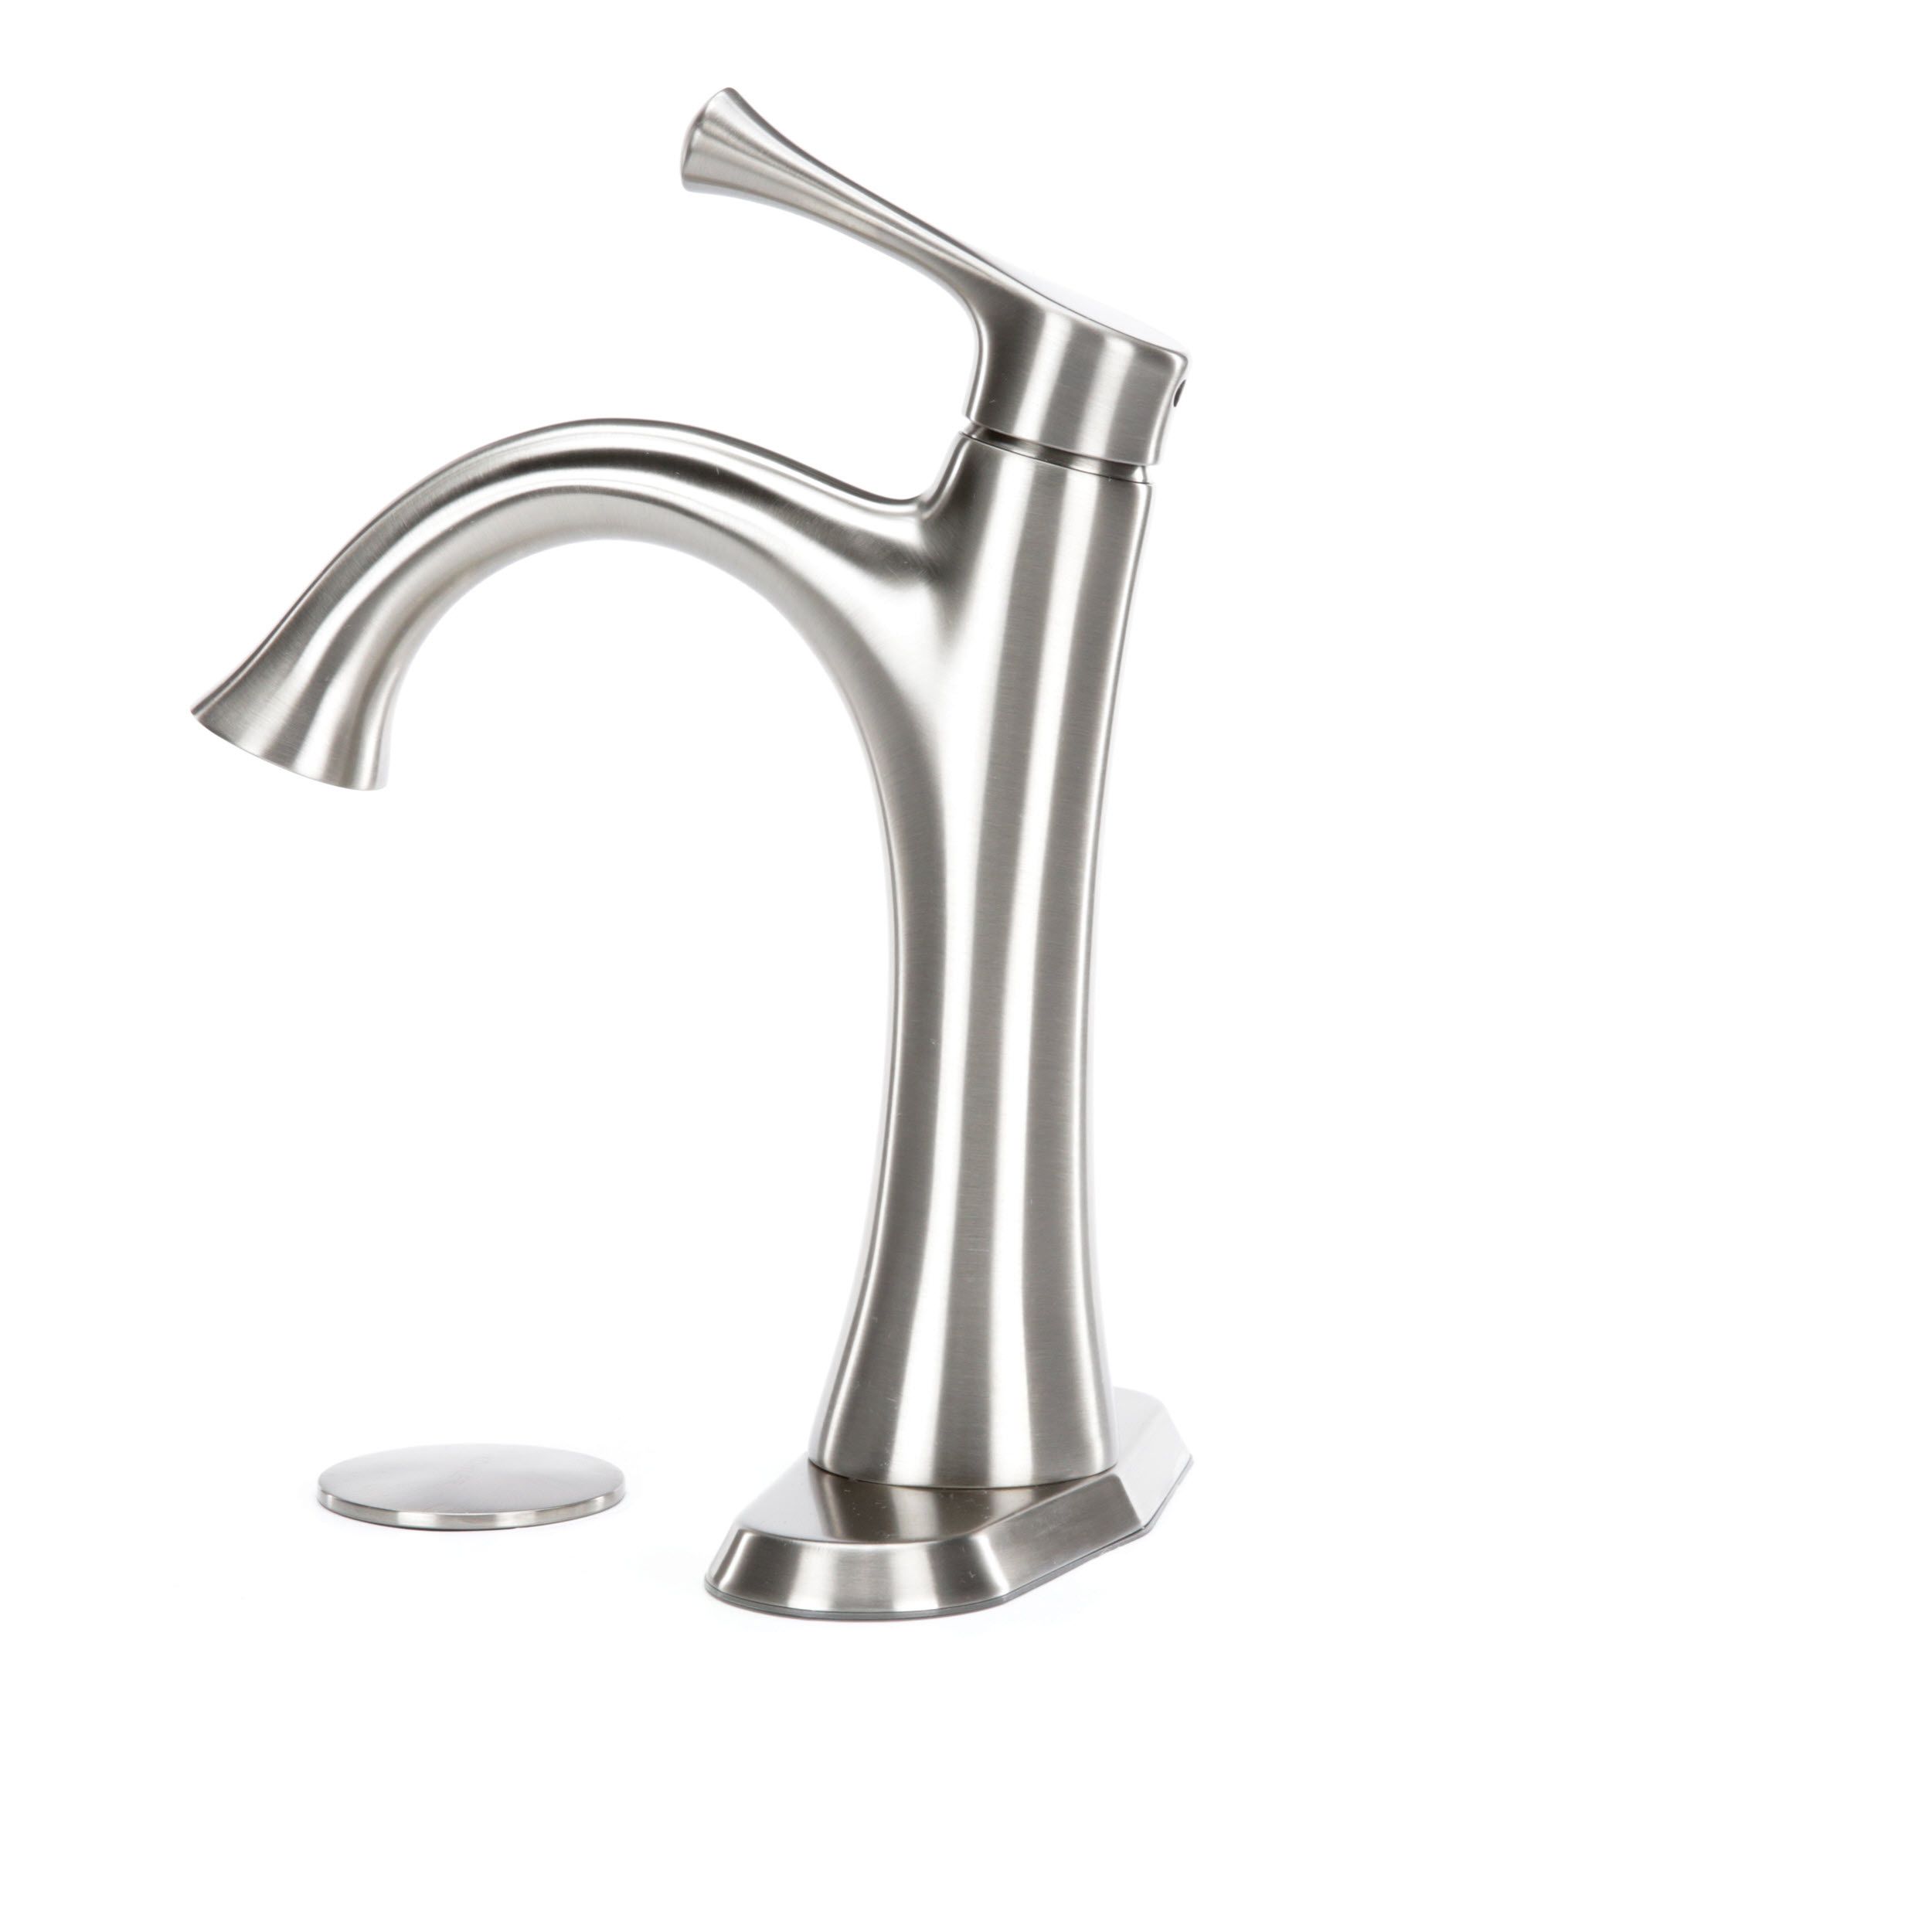 Lilyfield Kohler Brushed Nickel 1-Handle Bathtub and Shower Faucet with  Valve (R78048-4E-BN)